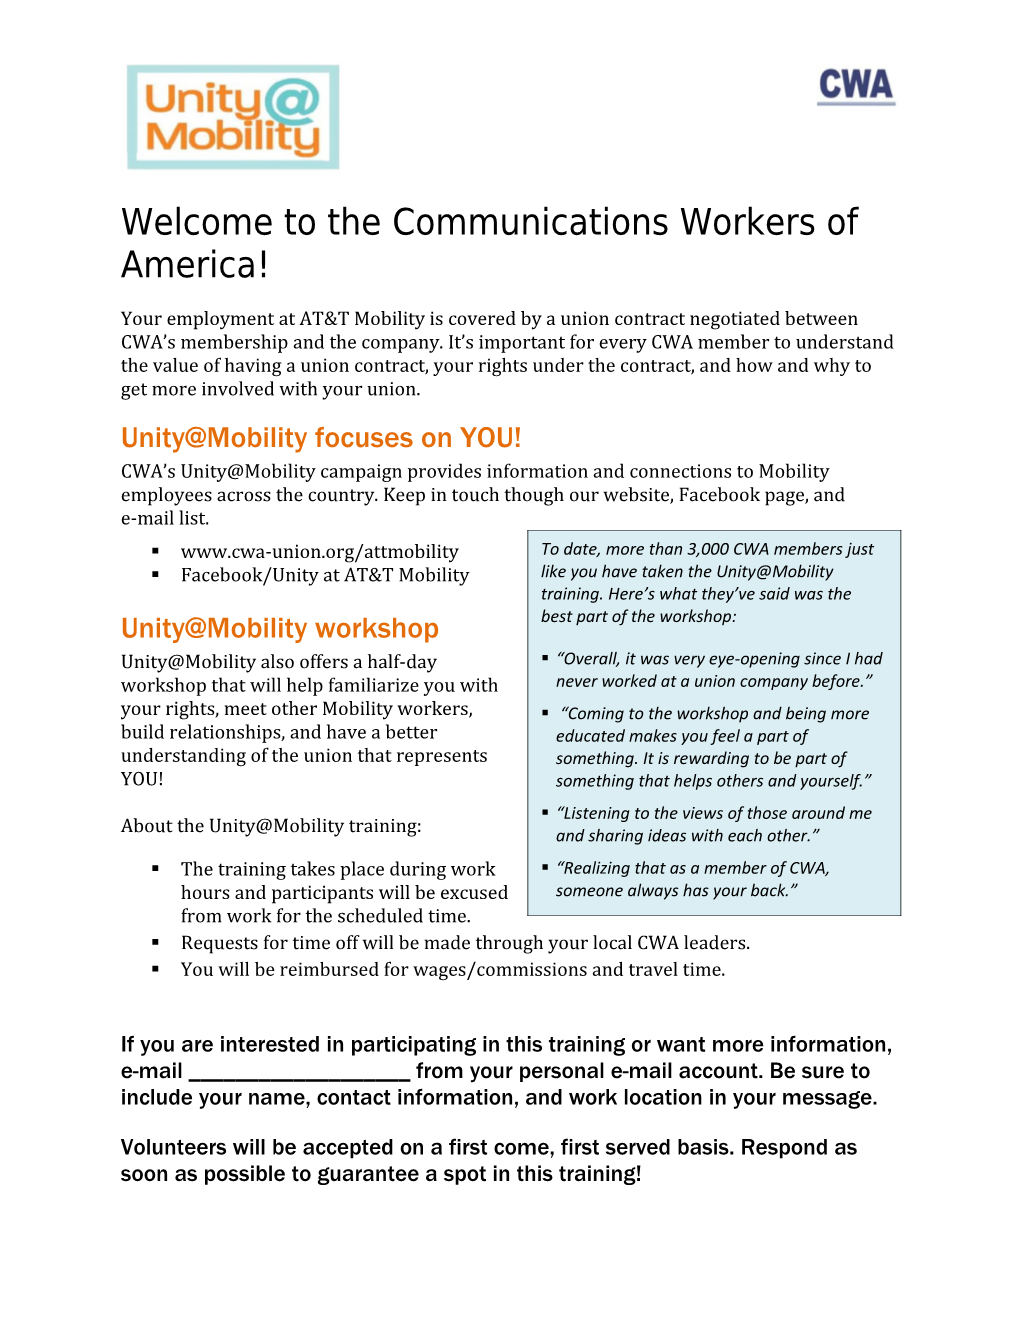 Welcome to the Communications Workers of America!